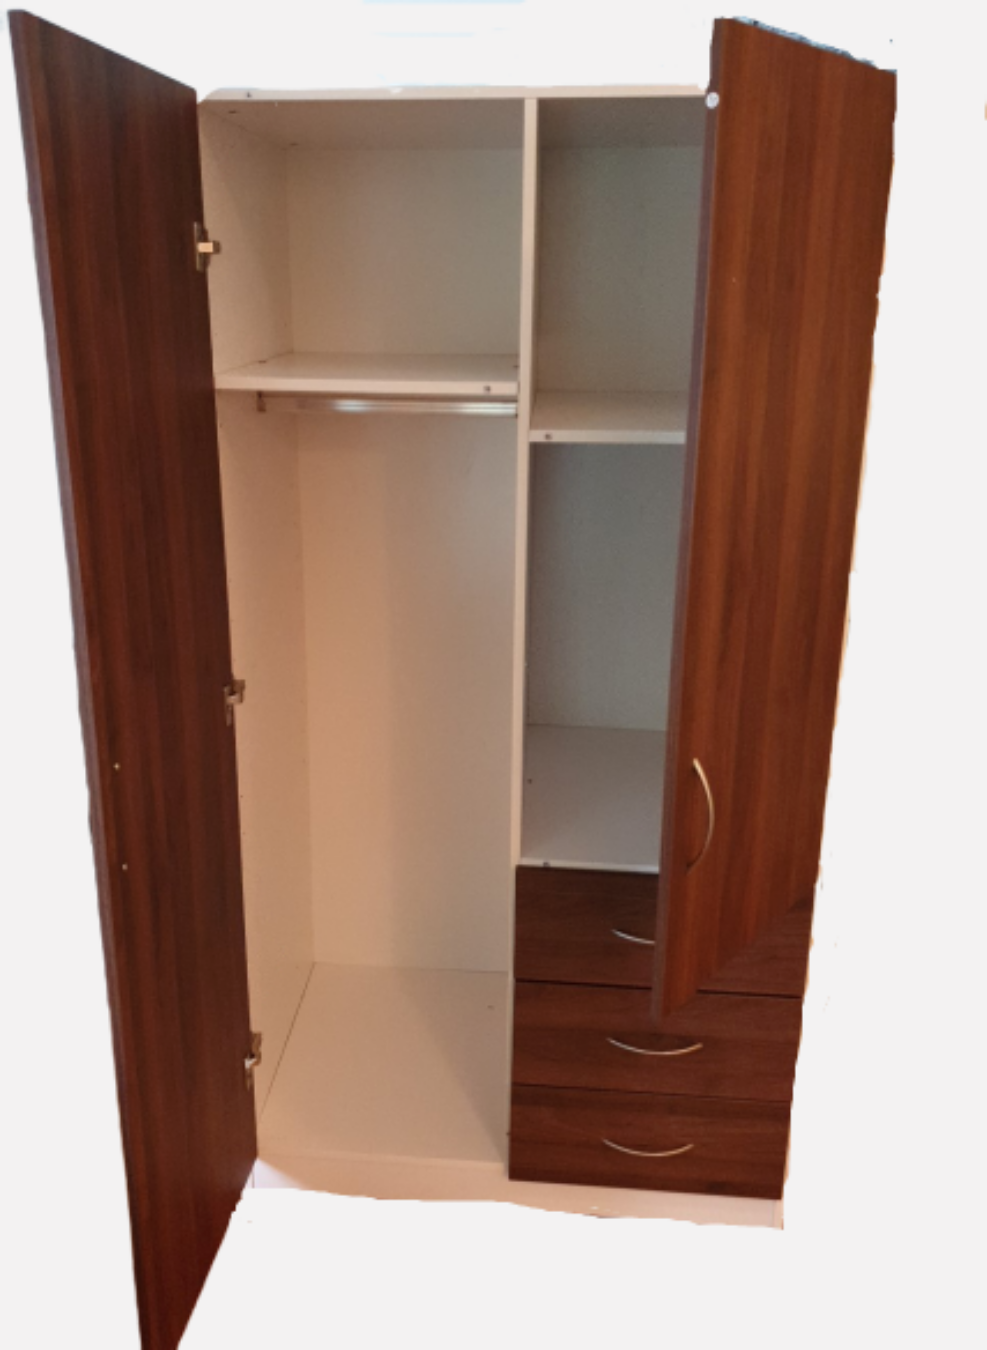 This ZETLAND WARDROBE 2 DOOR 3 DRAWER gives this piece a sense of grandeur, four internal shelves and 3 deep drawers ensure this piece is ideal for storing, linens, blankets, clothes or any pieces you may want out of view. 